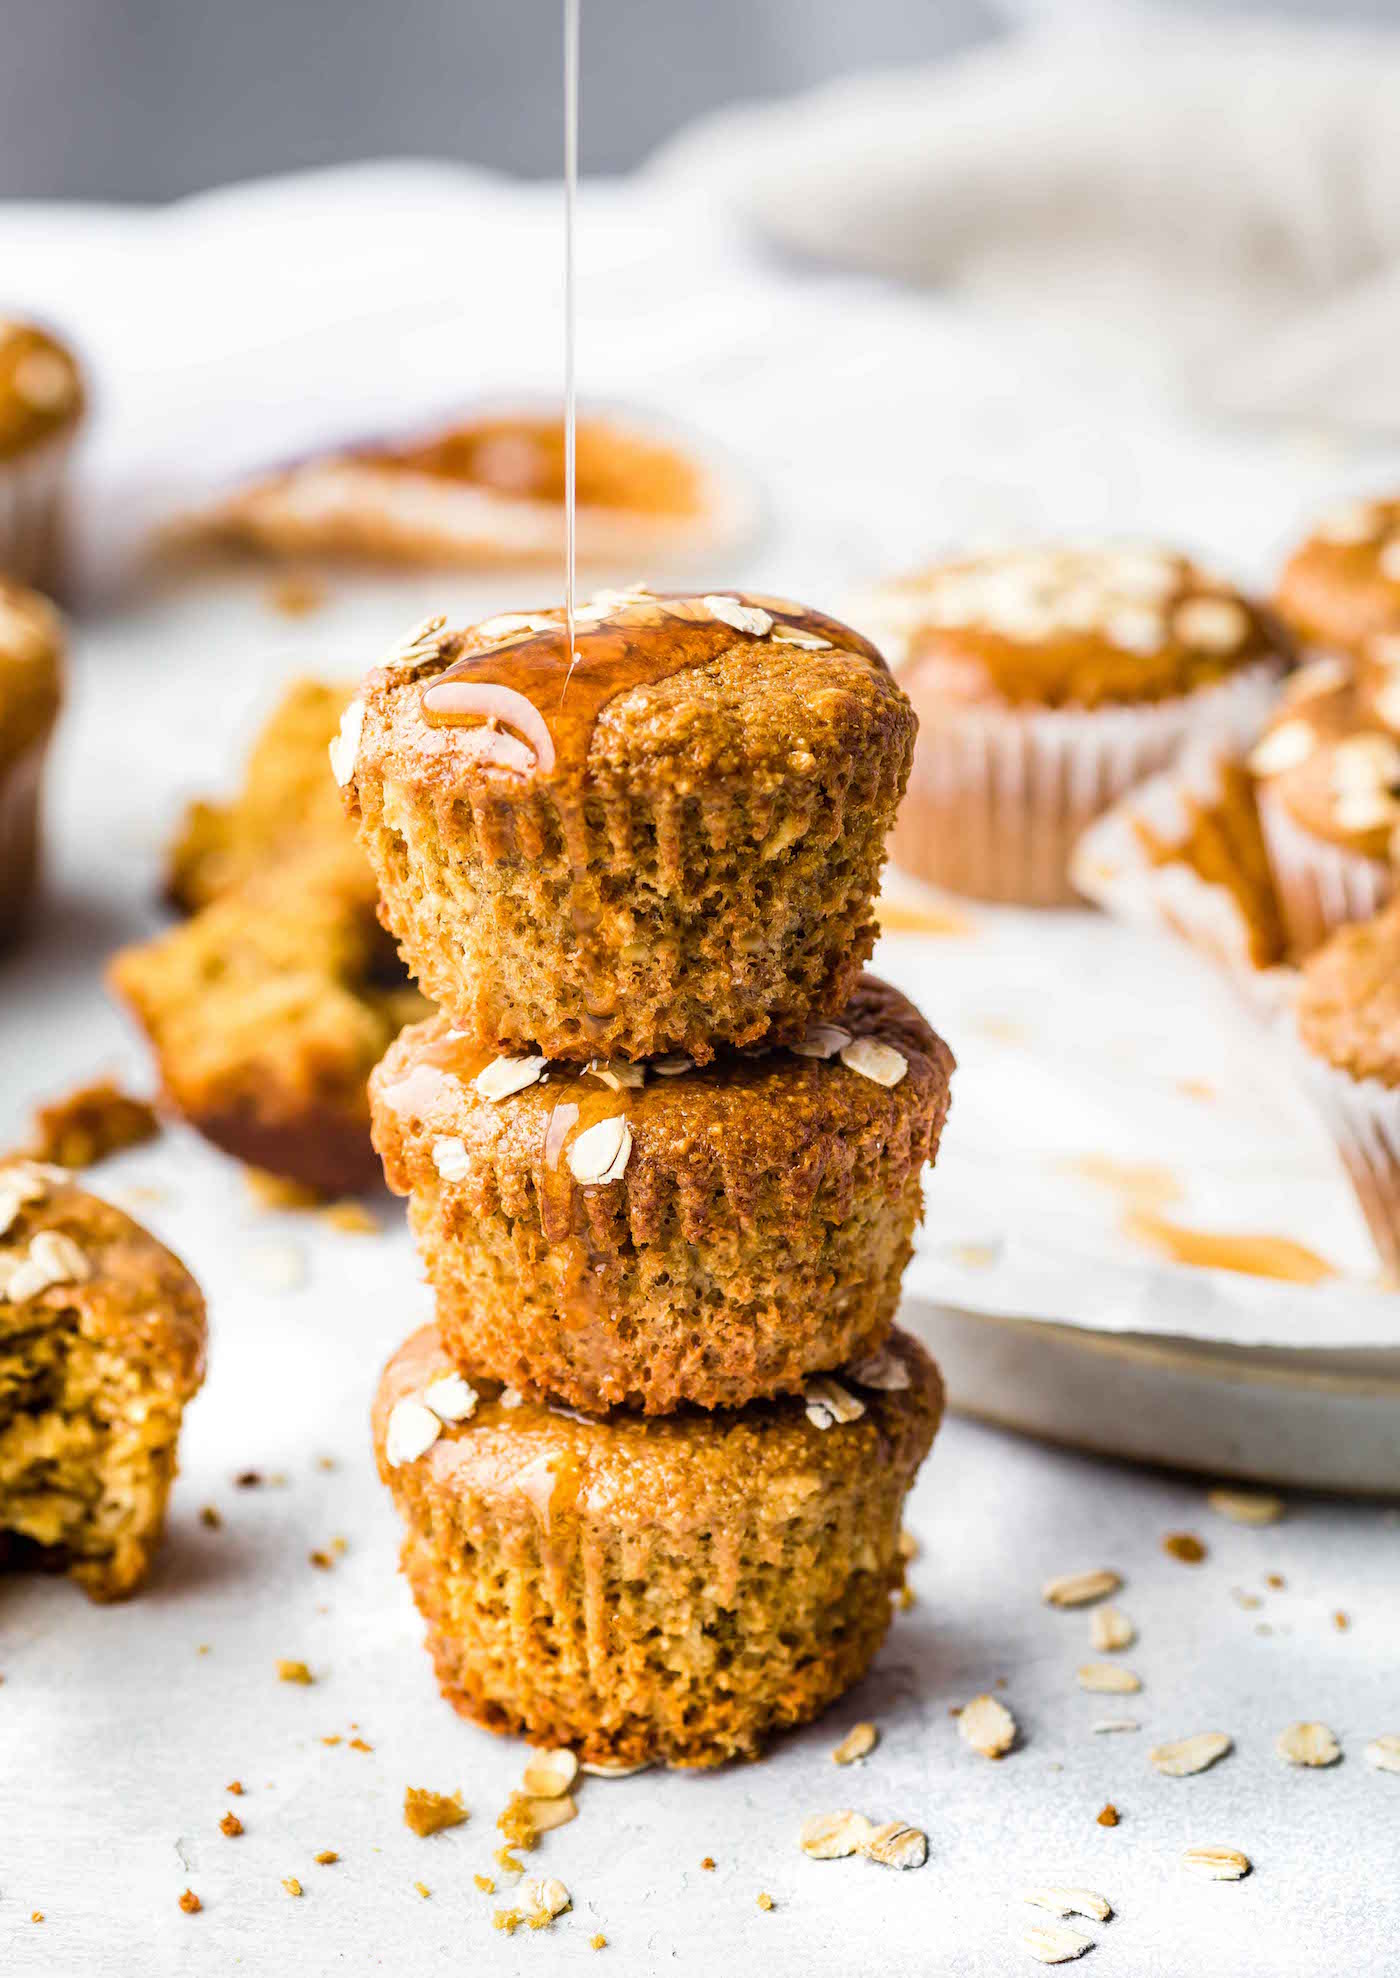 These Flourless Honey Oat Ricotta Muffins are easy to make for a healthy breakfast or snack! A Gluten-free Ricotta Muffins recipe that's honey sweetened and rich in protein, fiber, and calcium. Flourless baking made quick and simple